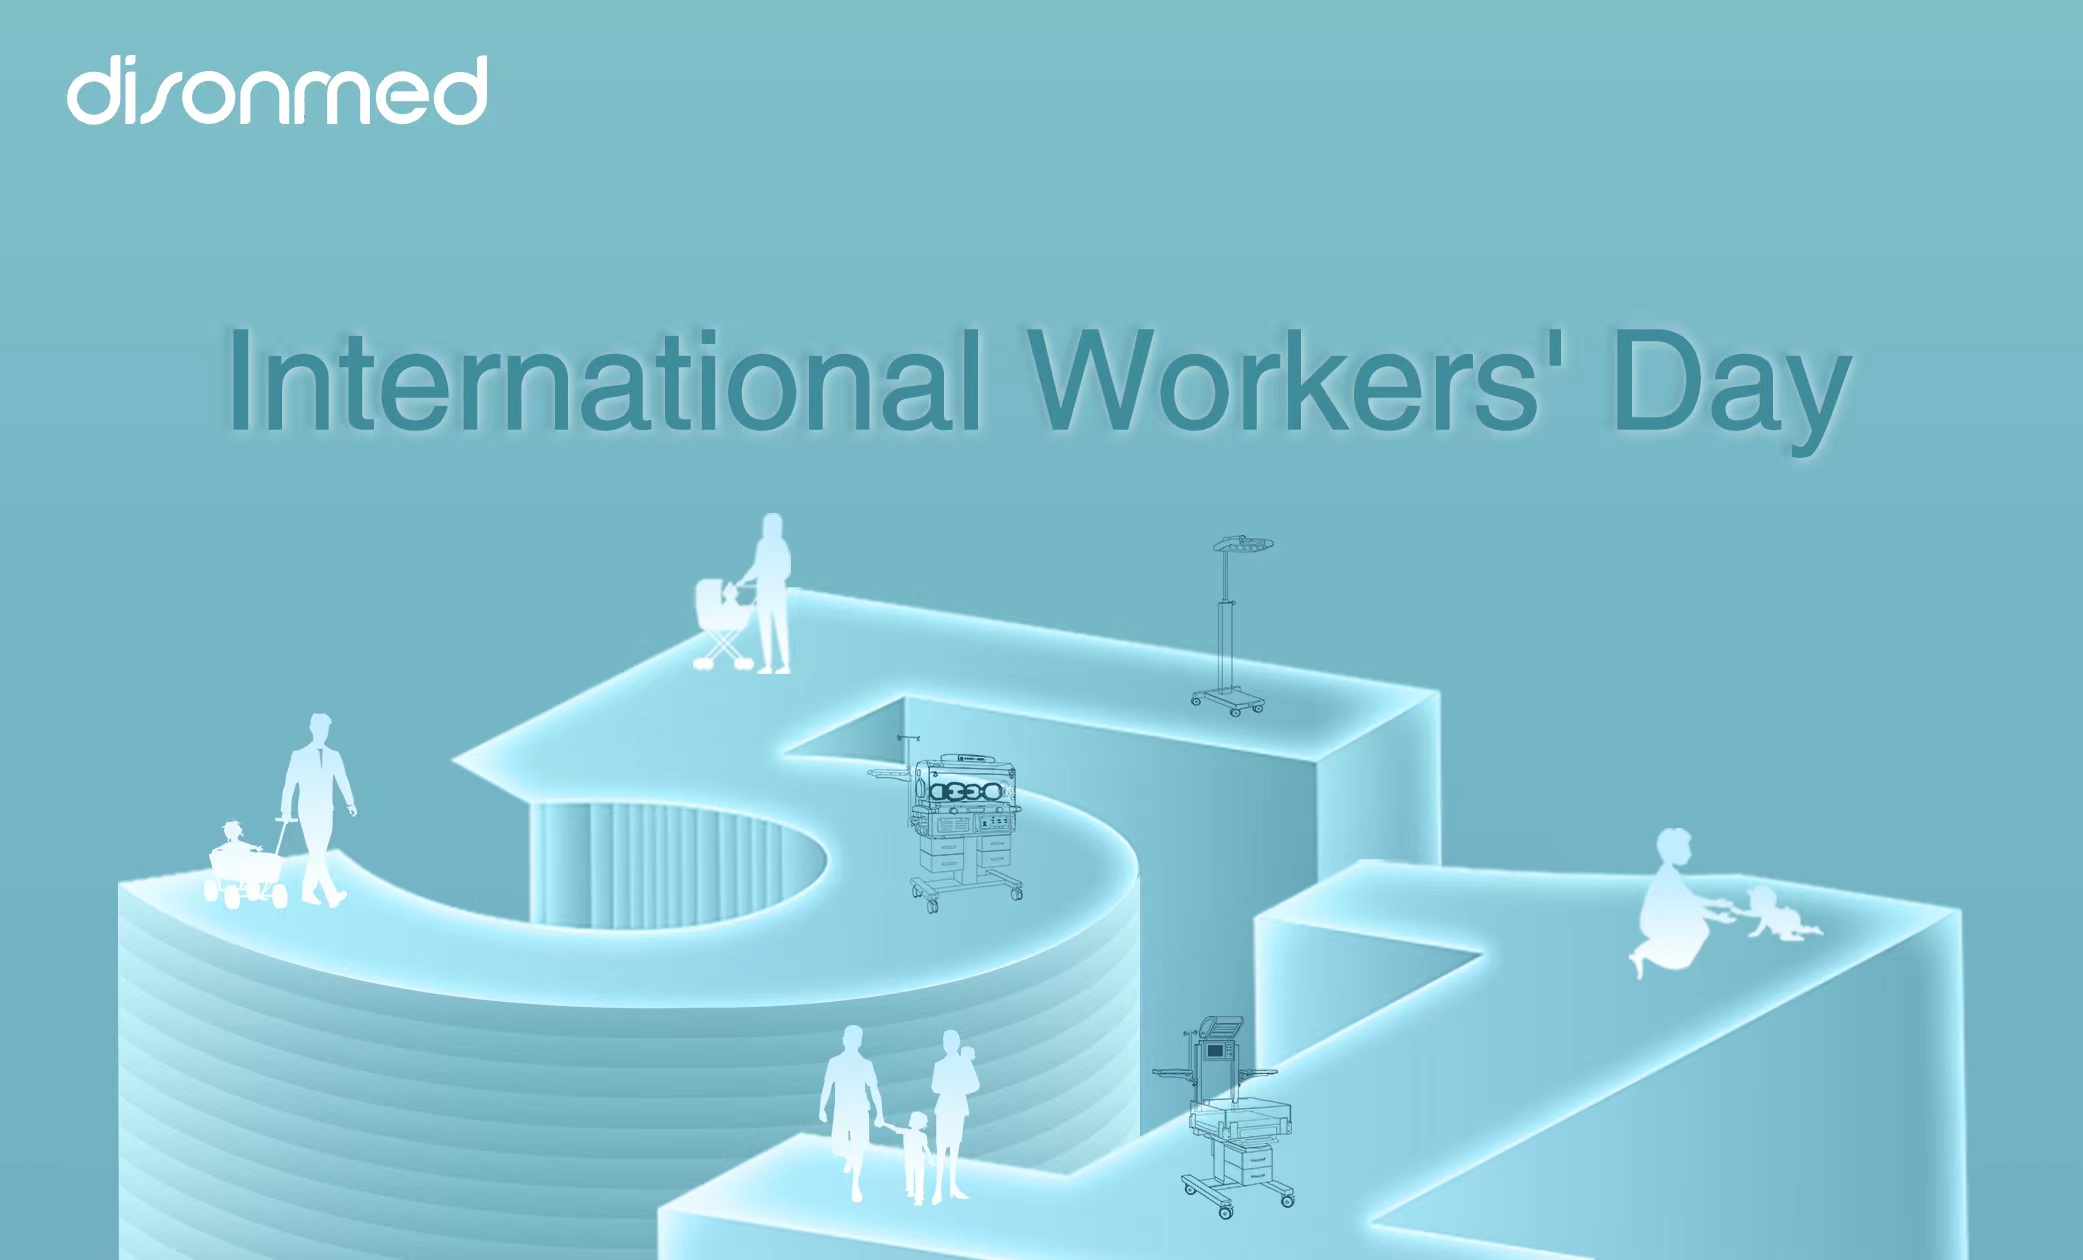 May 1st, the International Worker's Day